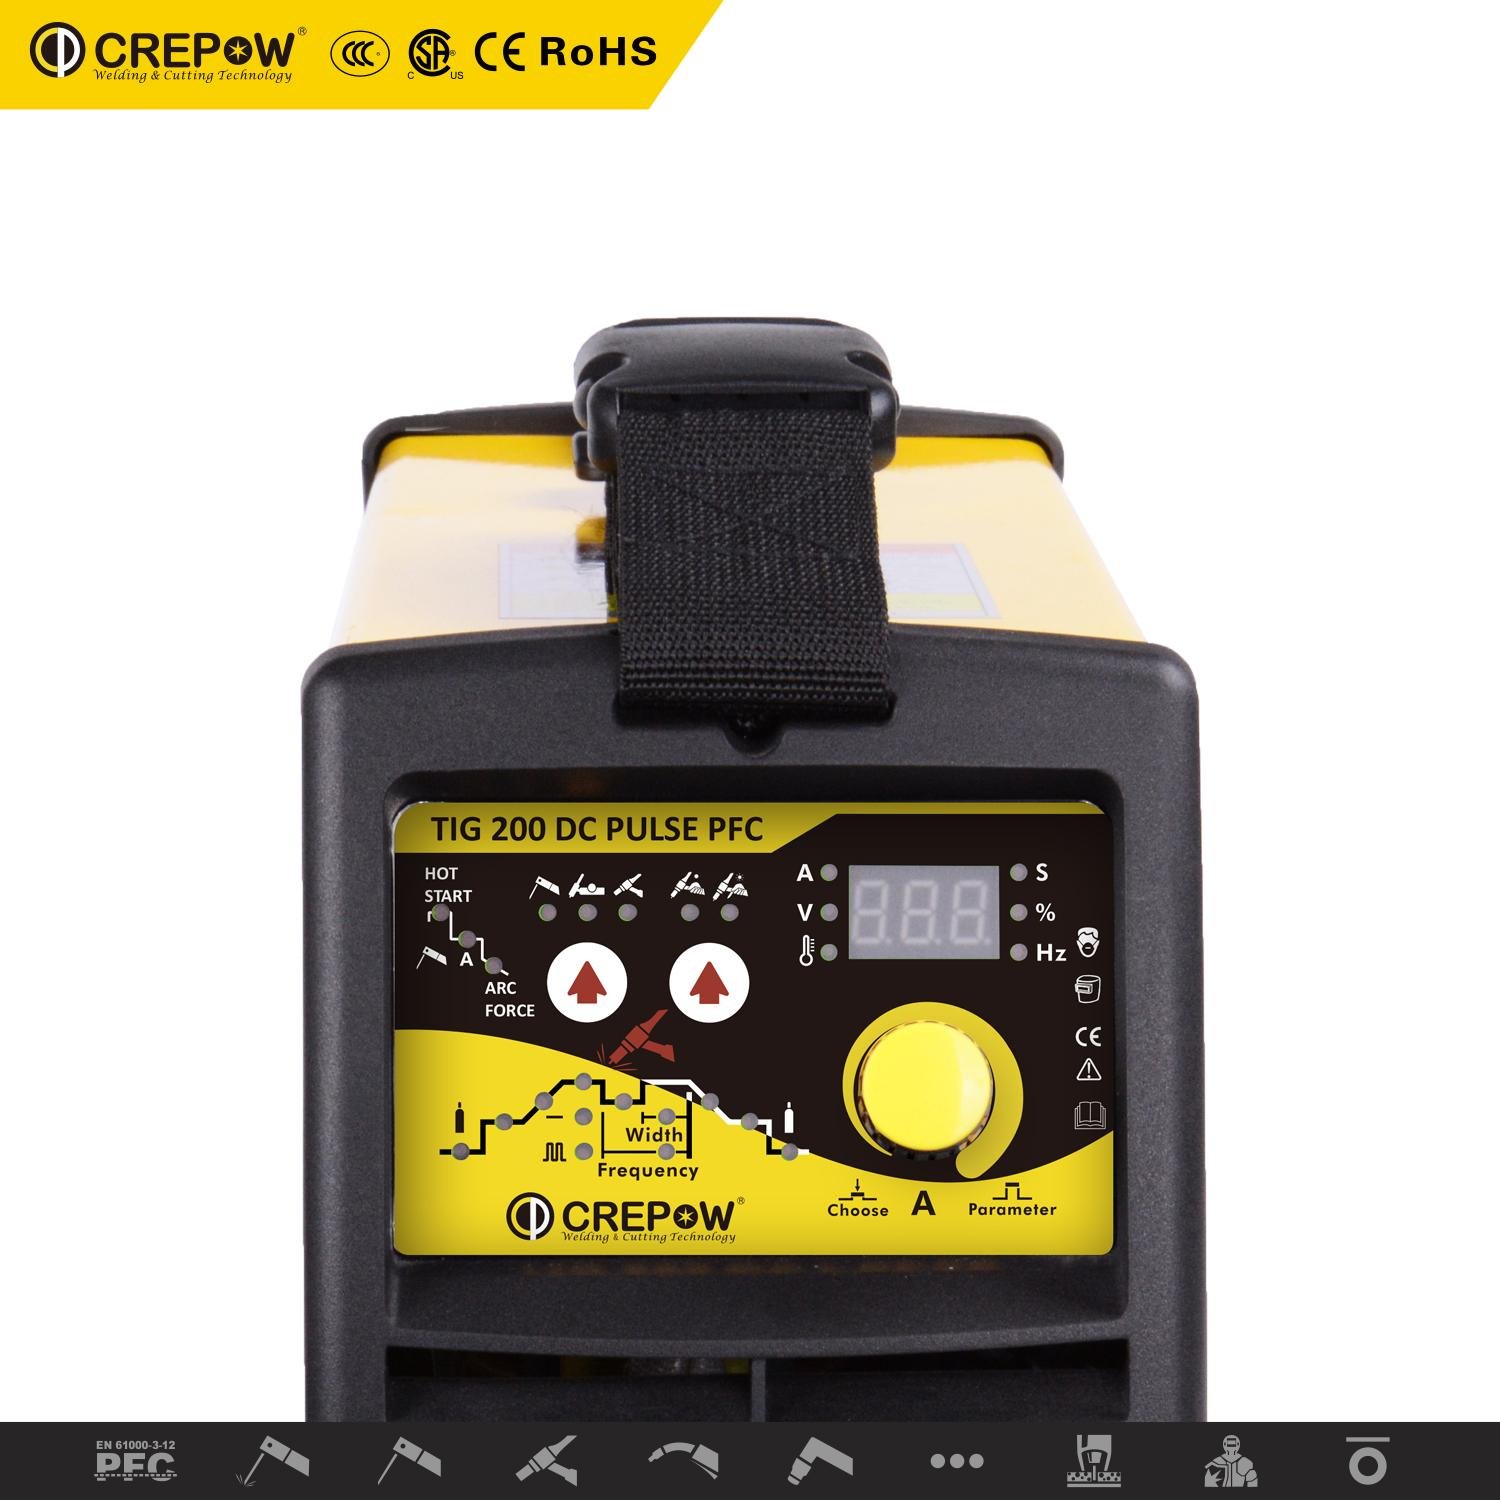  Crepow Inverter TIG200 DC PULSED PFC with DC TIG & MMA 4